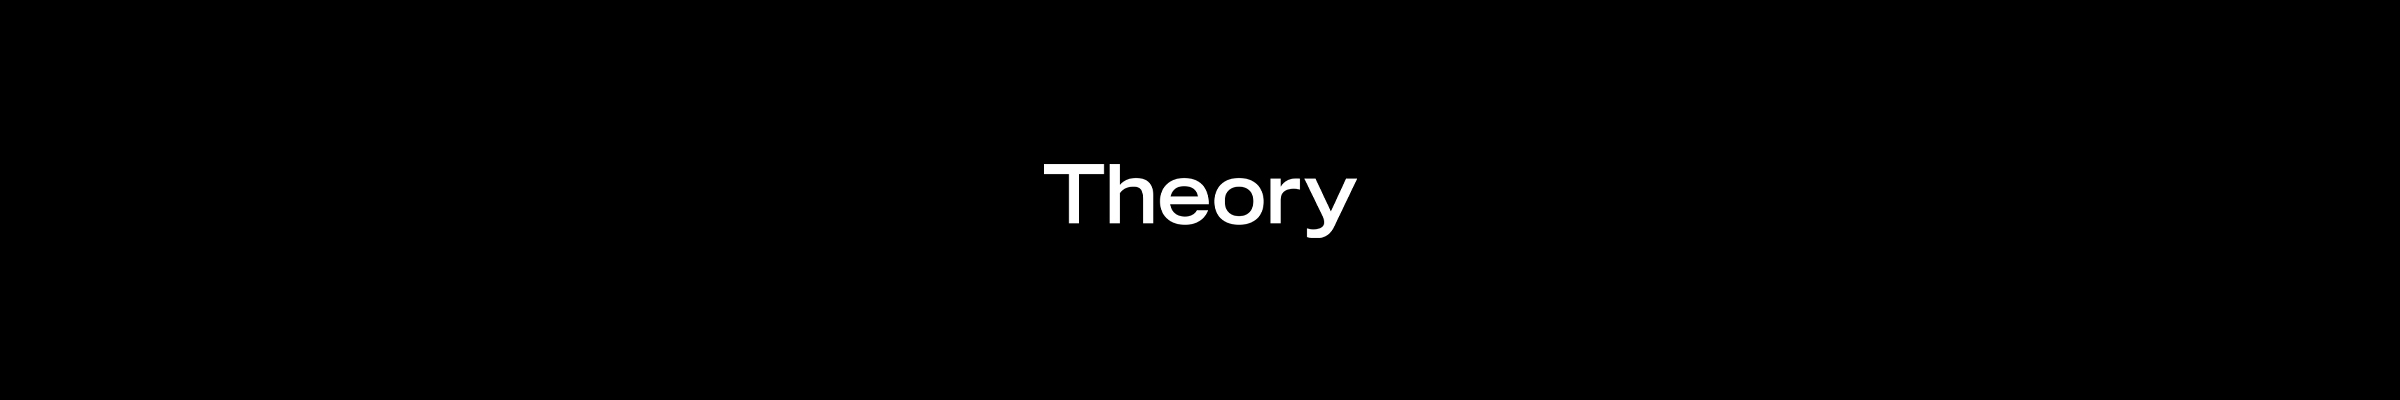 theory-banner